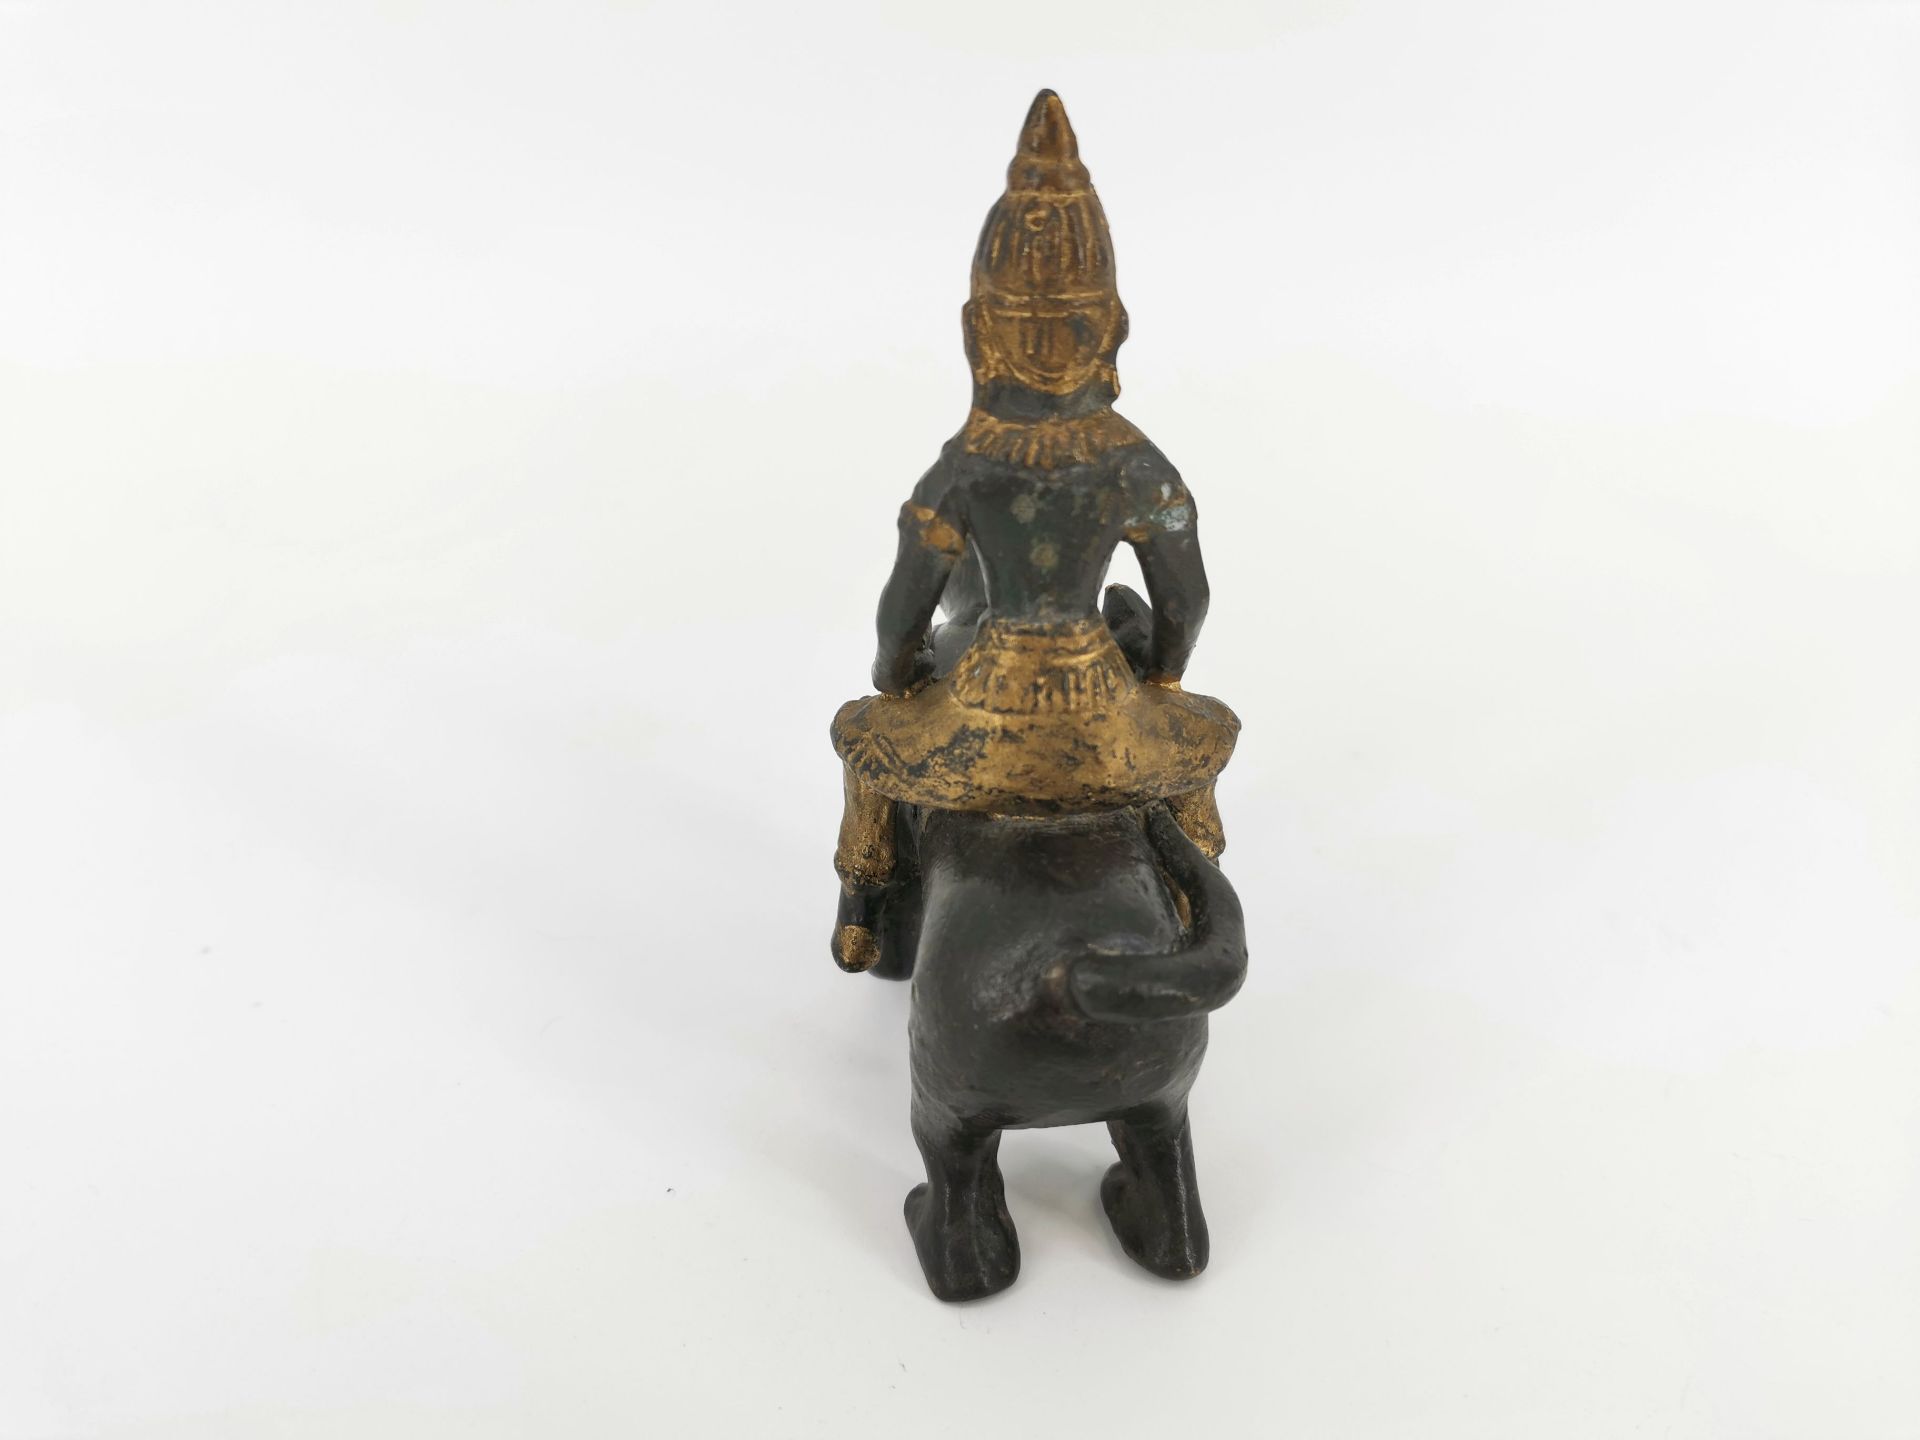 FIGURE / BRONZE SCULPTURE: Man riding a monkey, Thailand, bronze, partially painted in gold colour - Image 4 of 4